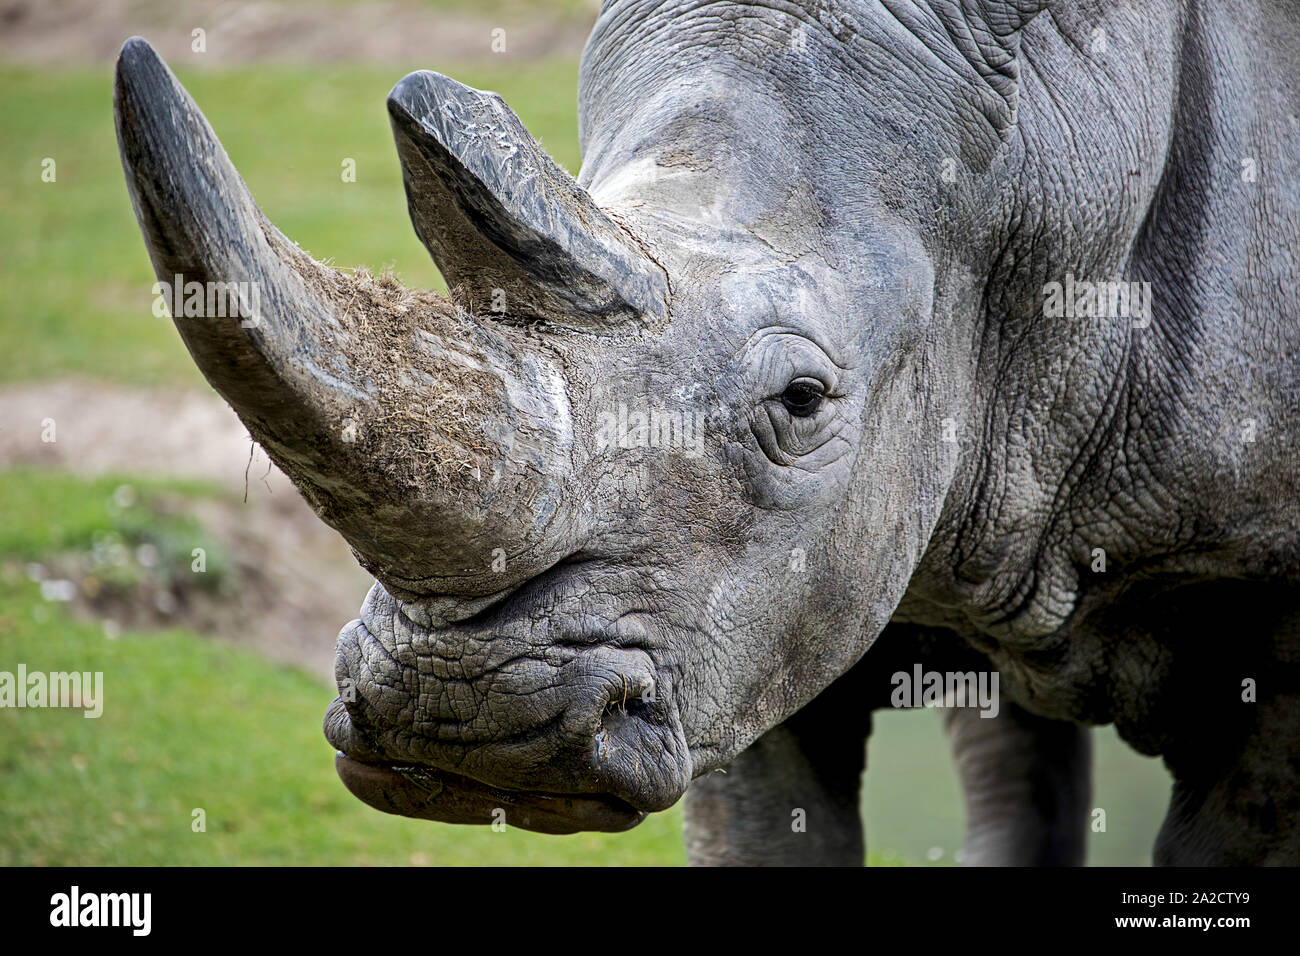 portrait of a squaremouthed rhinoceros with two big horns Stock Photo